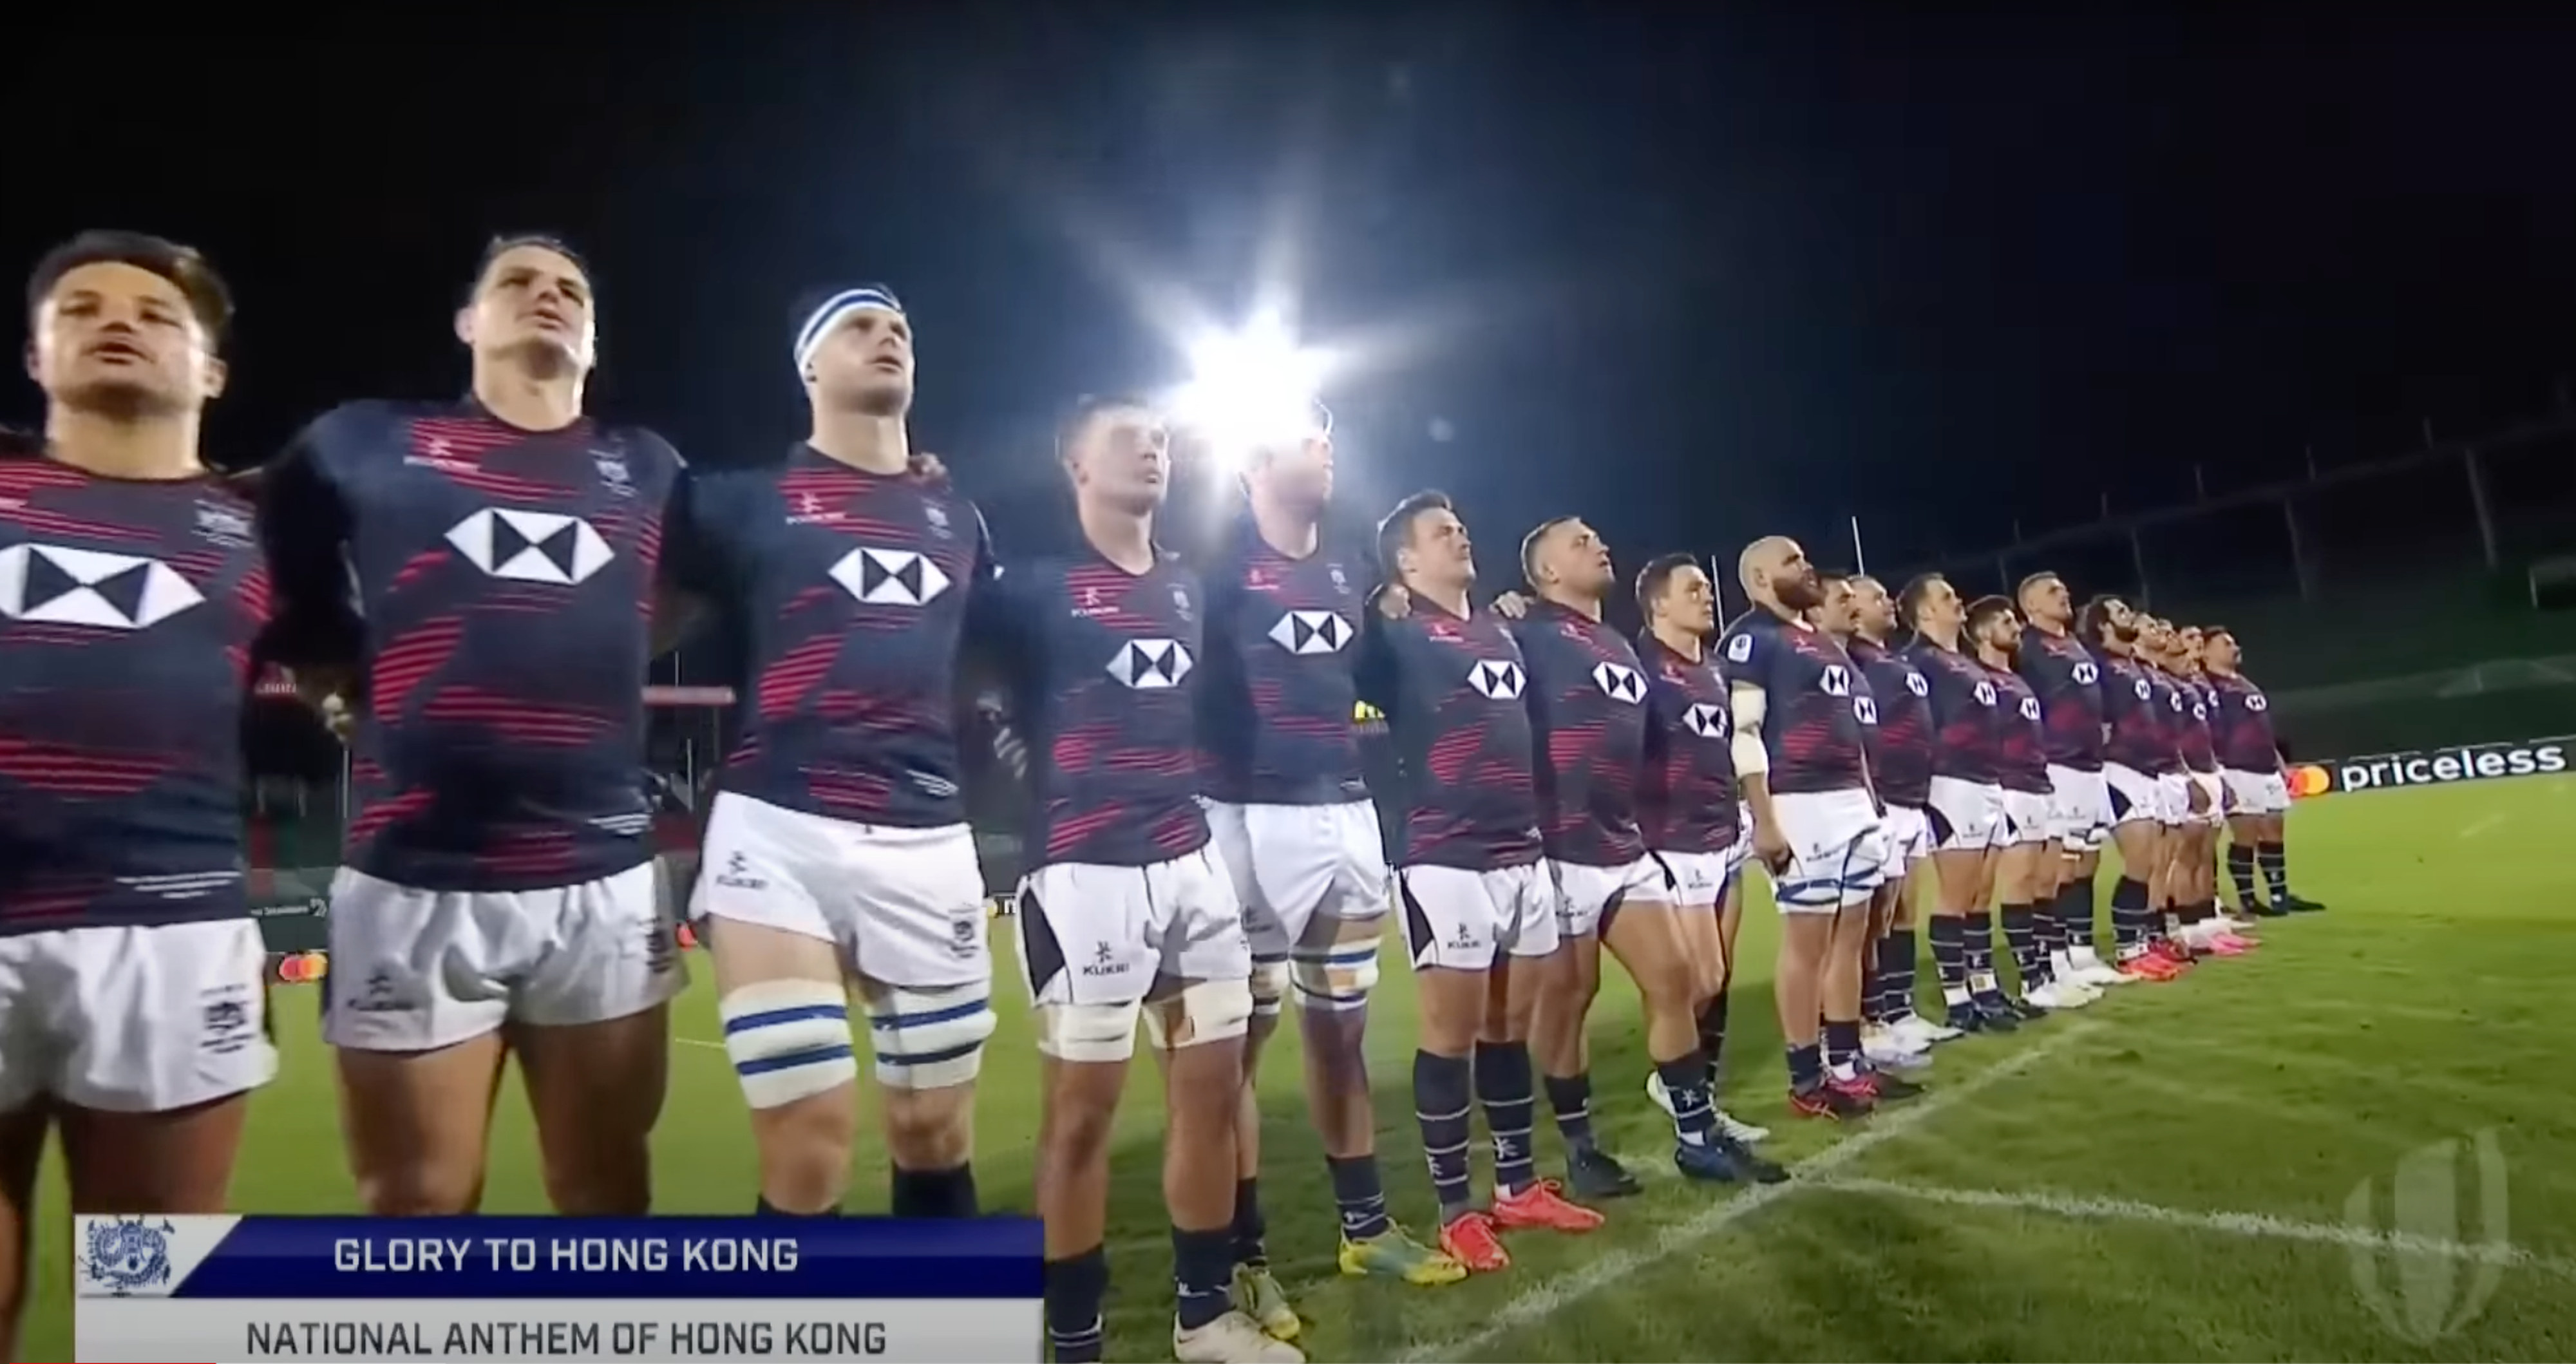 The wrong title for the national anthem was given in a broadcast of a rugby game involving Hong Kong’s team earlier this year. Photo: YouTube